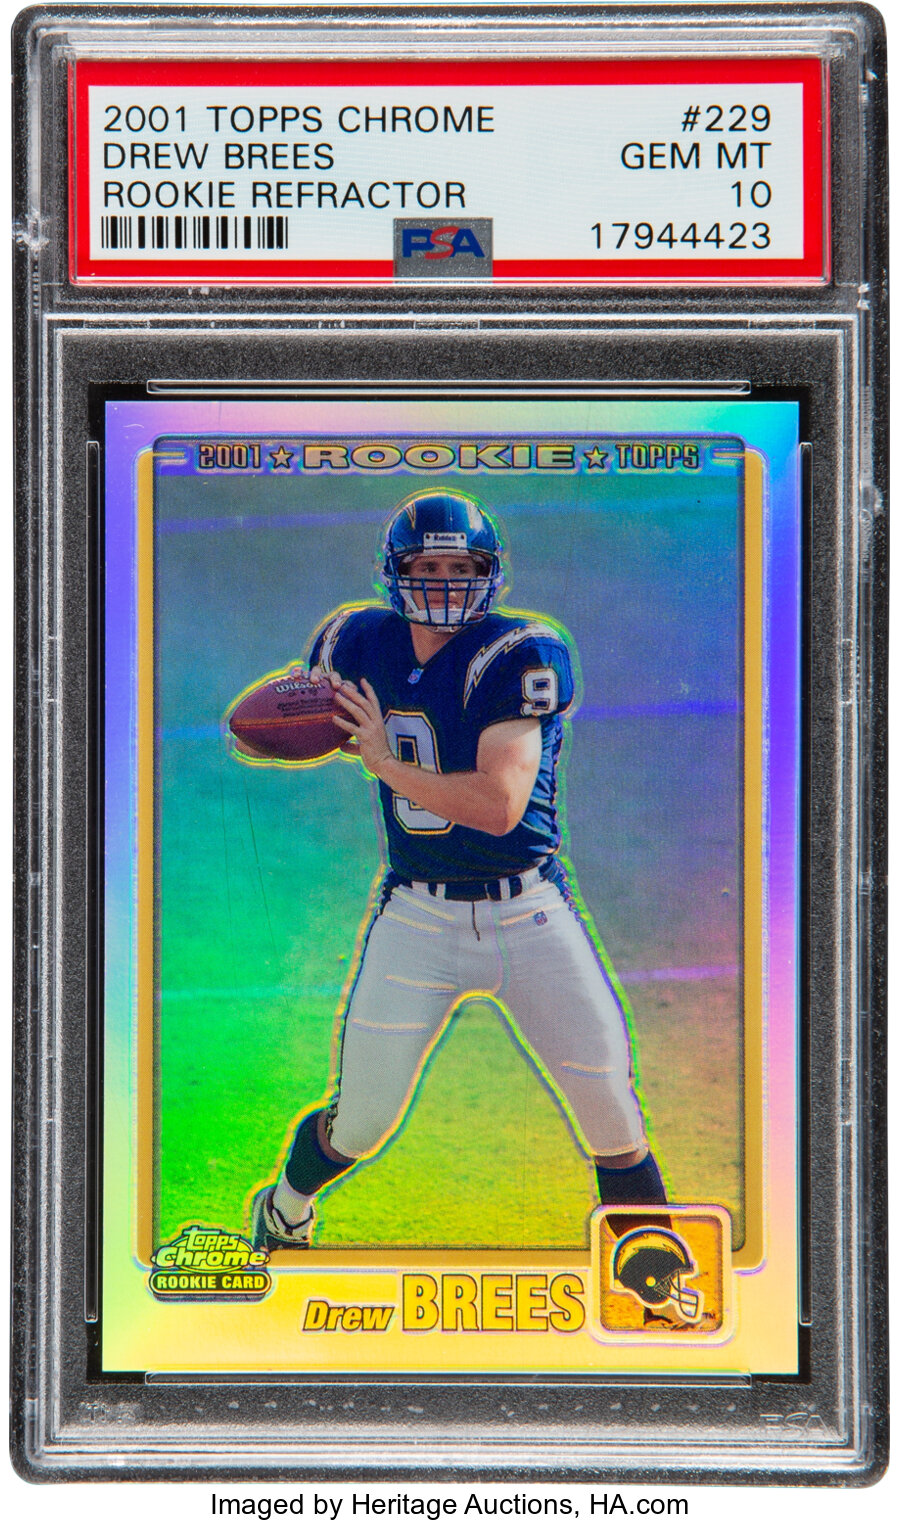 2001 Topps Chrome Rookie Refractor Drew Brees #229 PSA Gem Mint 10 - Serial Numbered 305/999